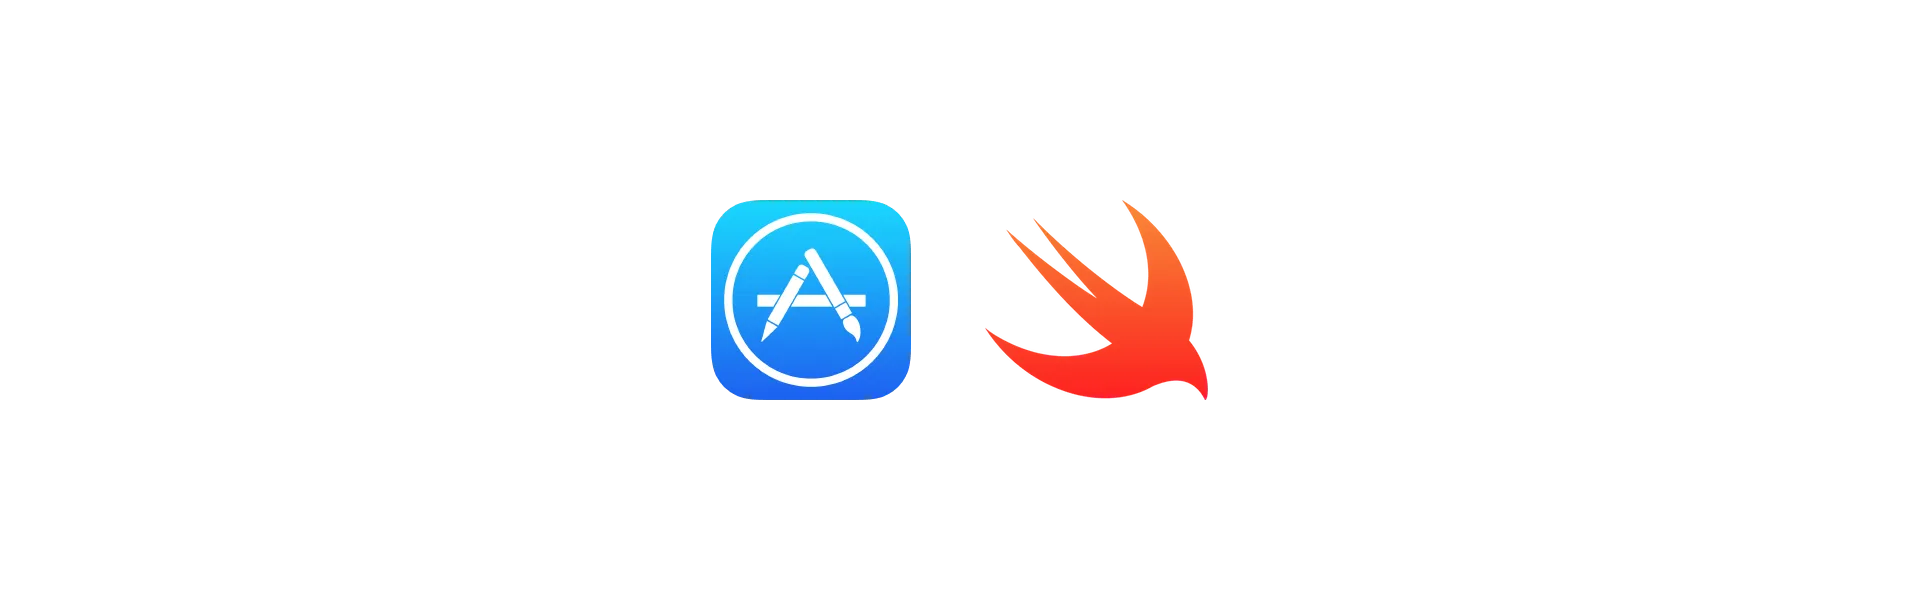 The App Store and Swift logos